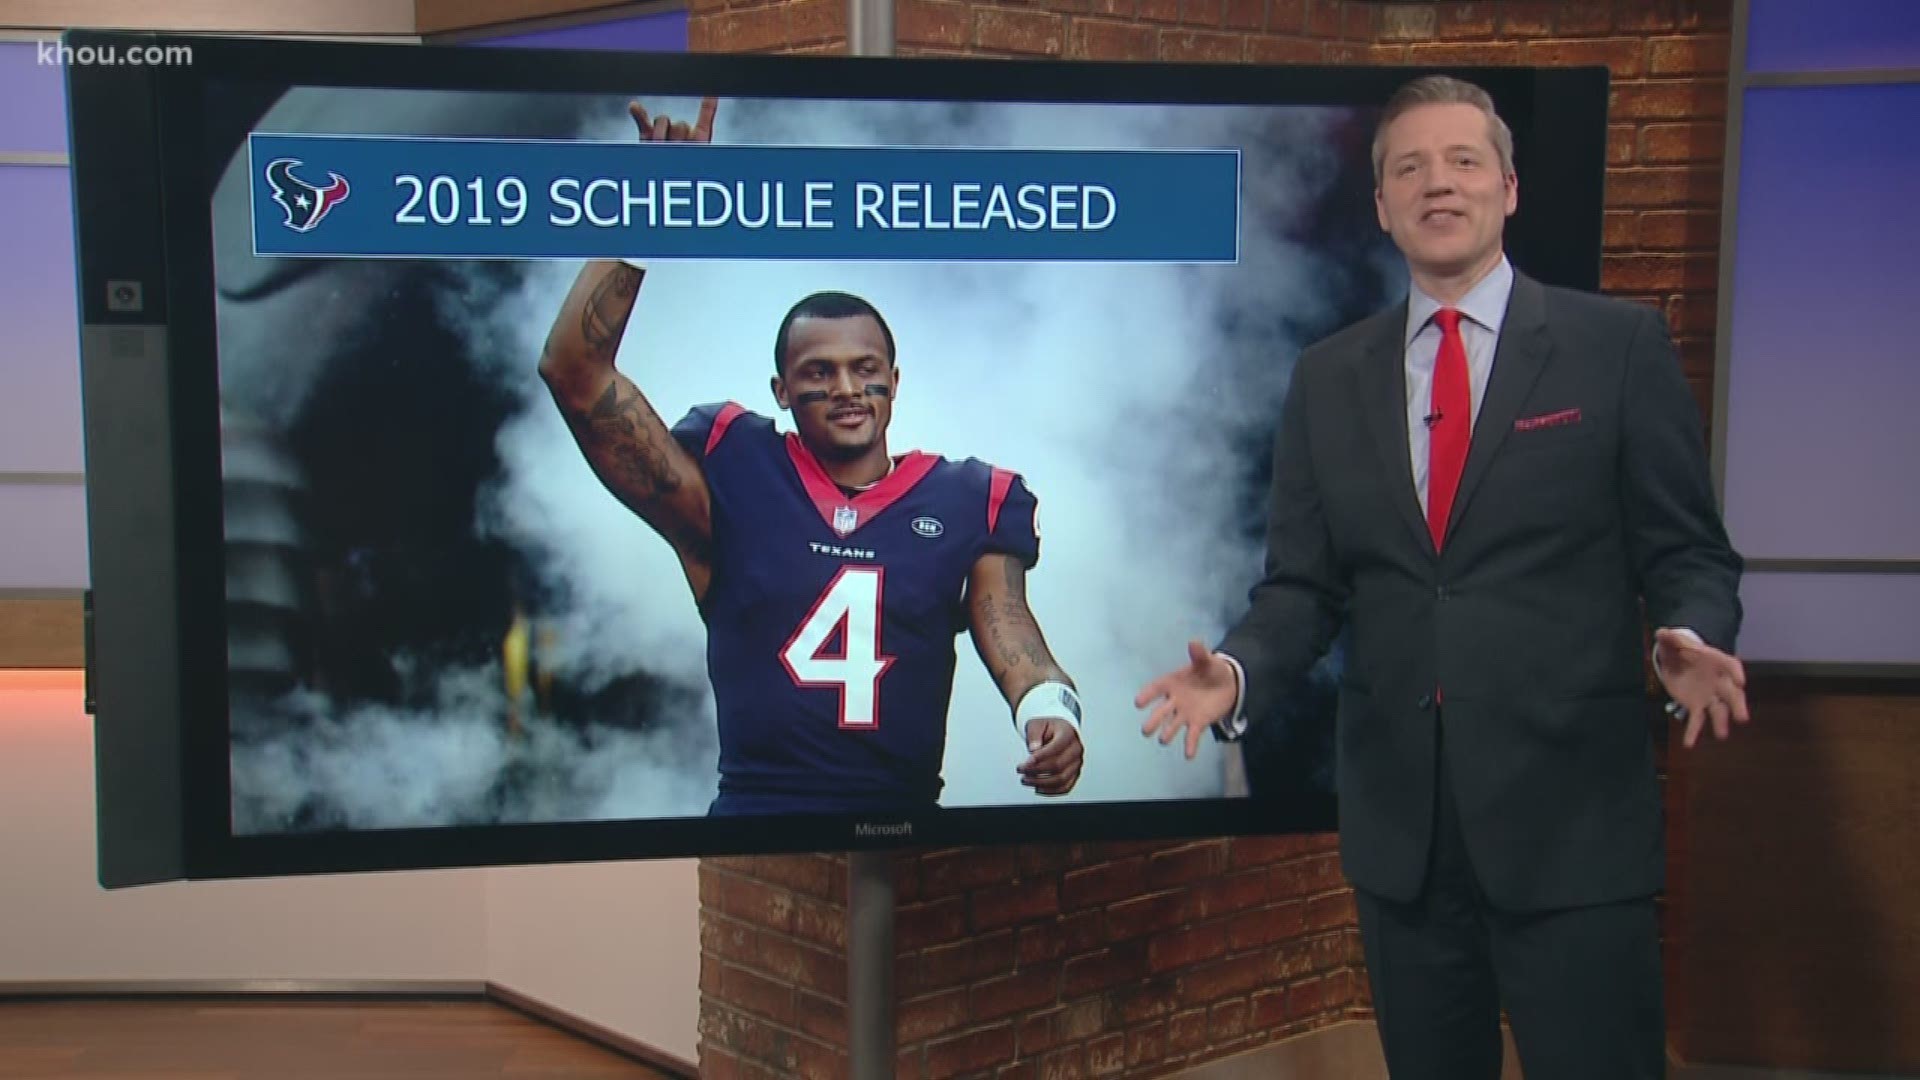 The NFL just dropped its 2019 regular season schedule. So which Texans game are fans most excited about?